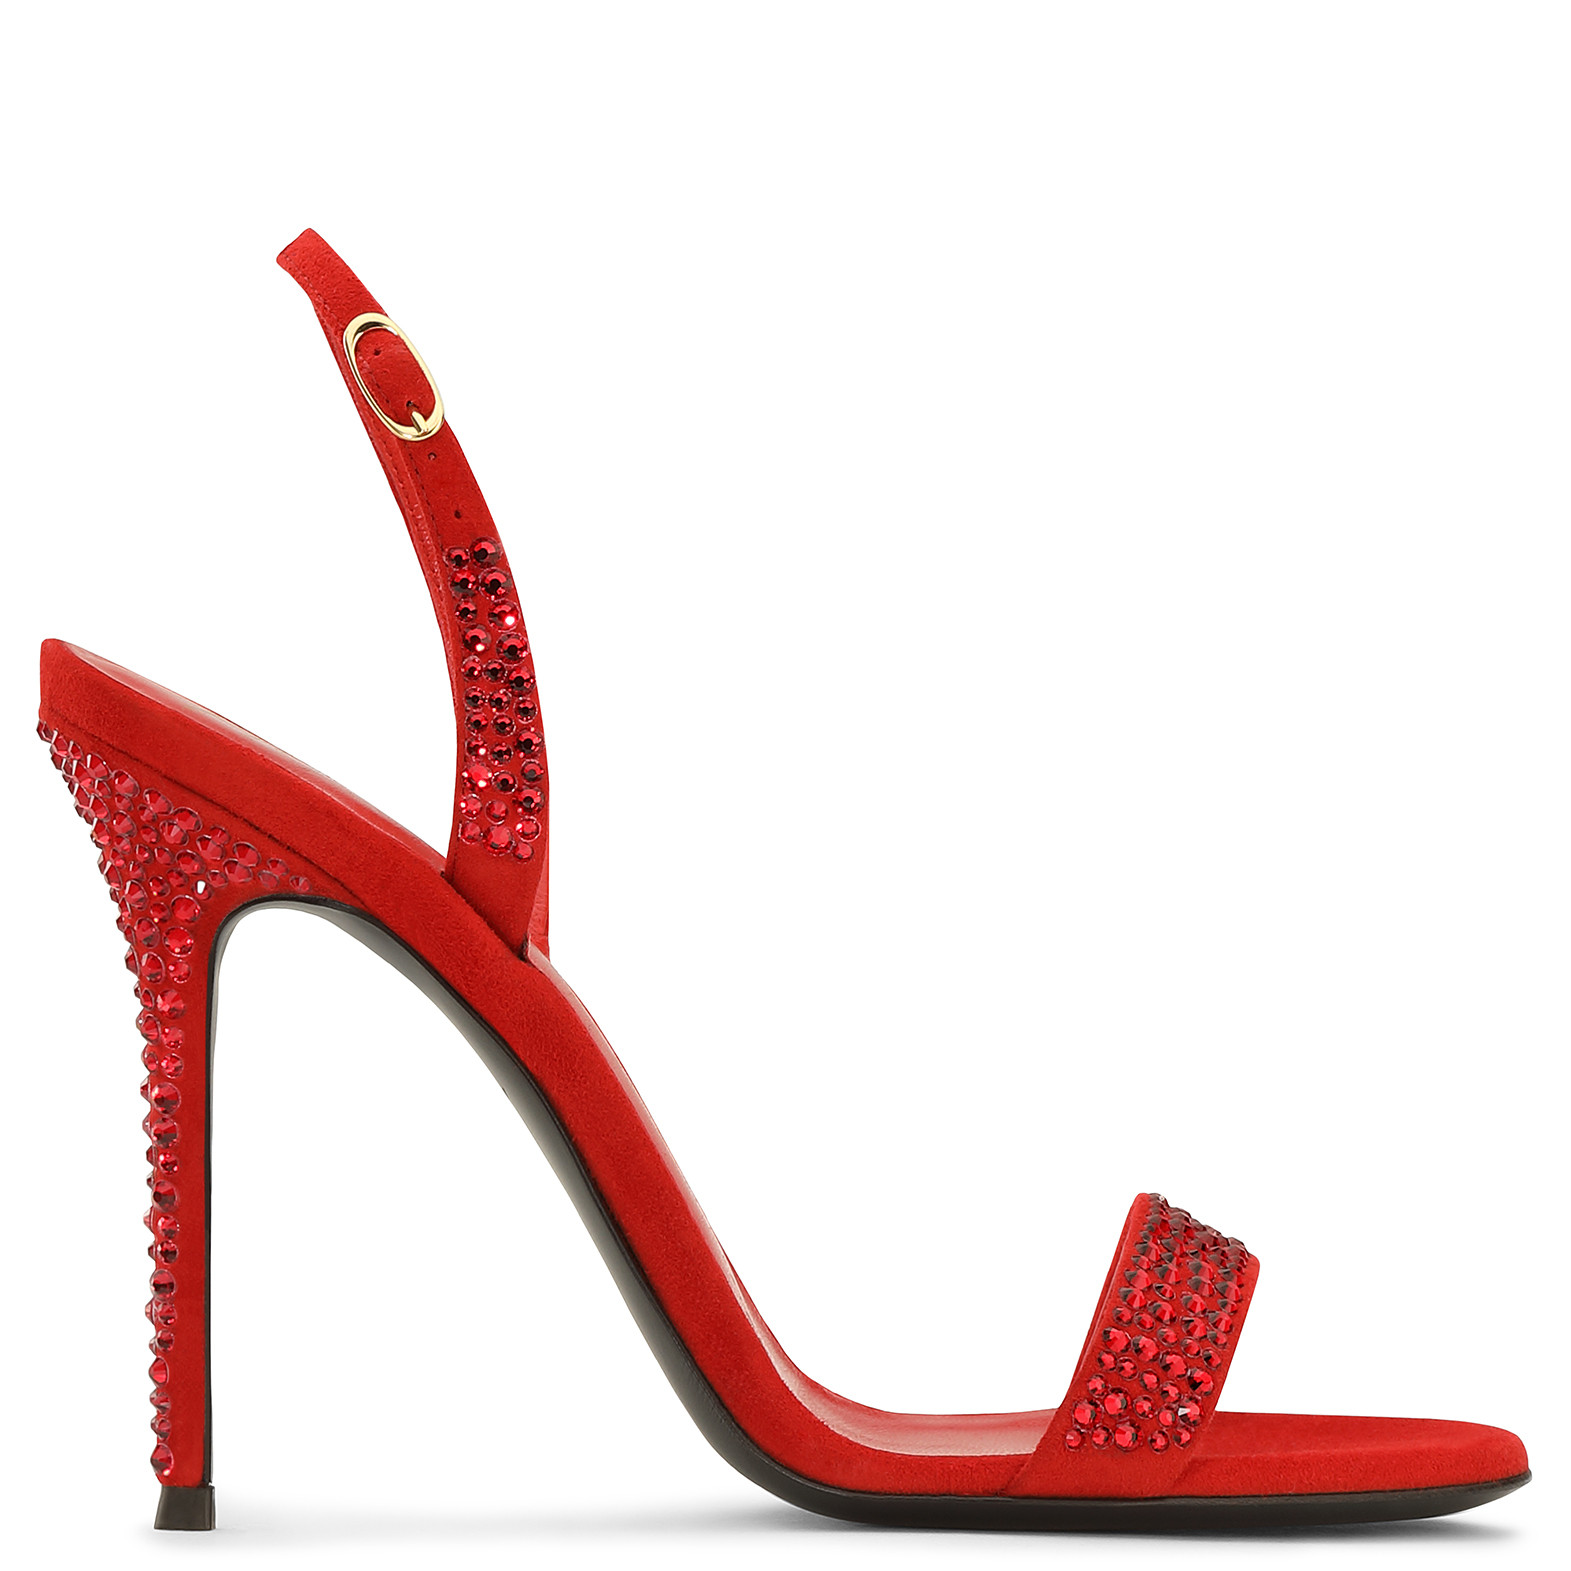 Giuseppe Zanotti - Red Suede Sandal With Crystals Adalie | ModeSens